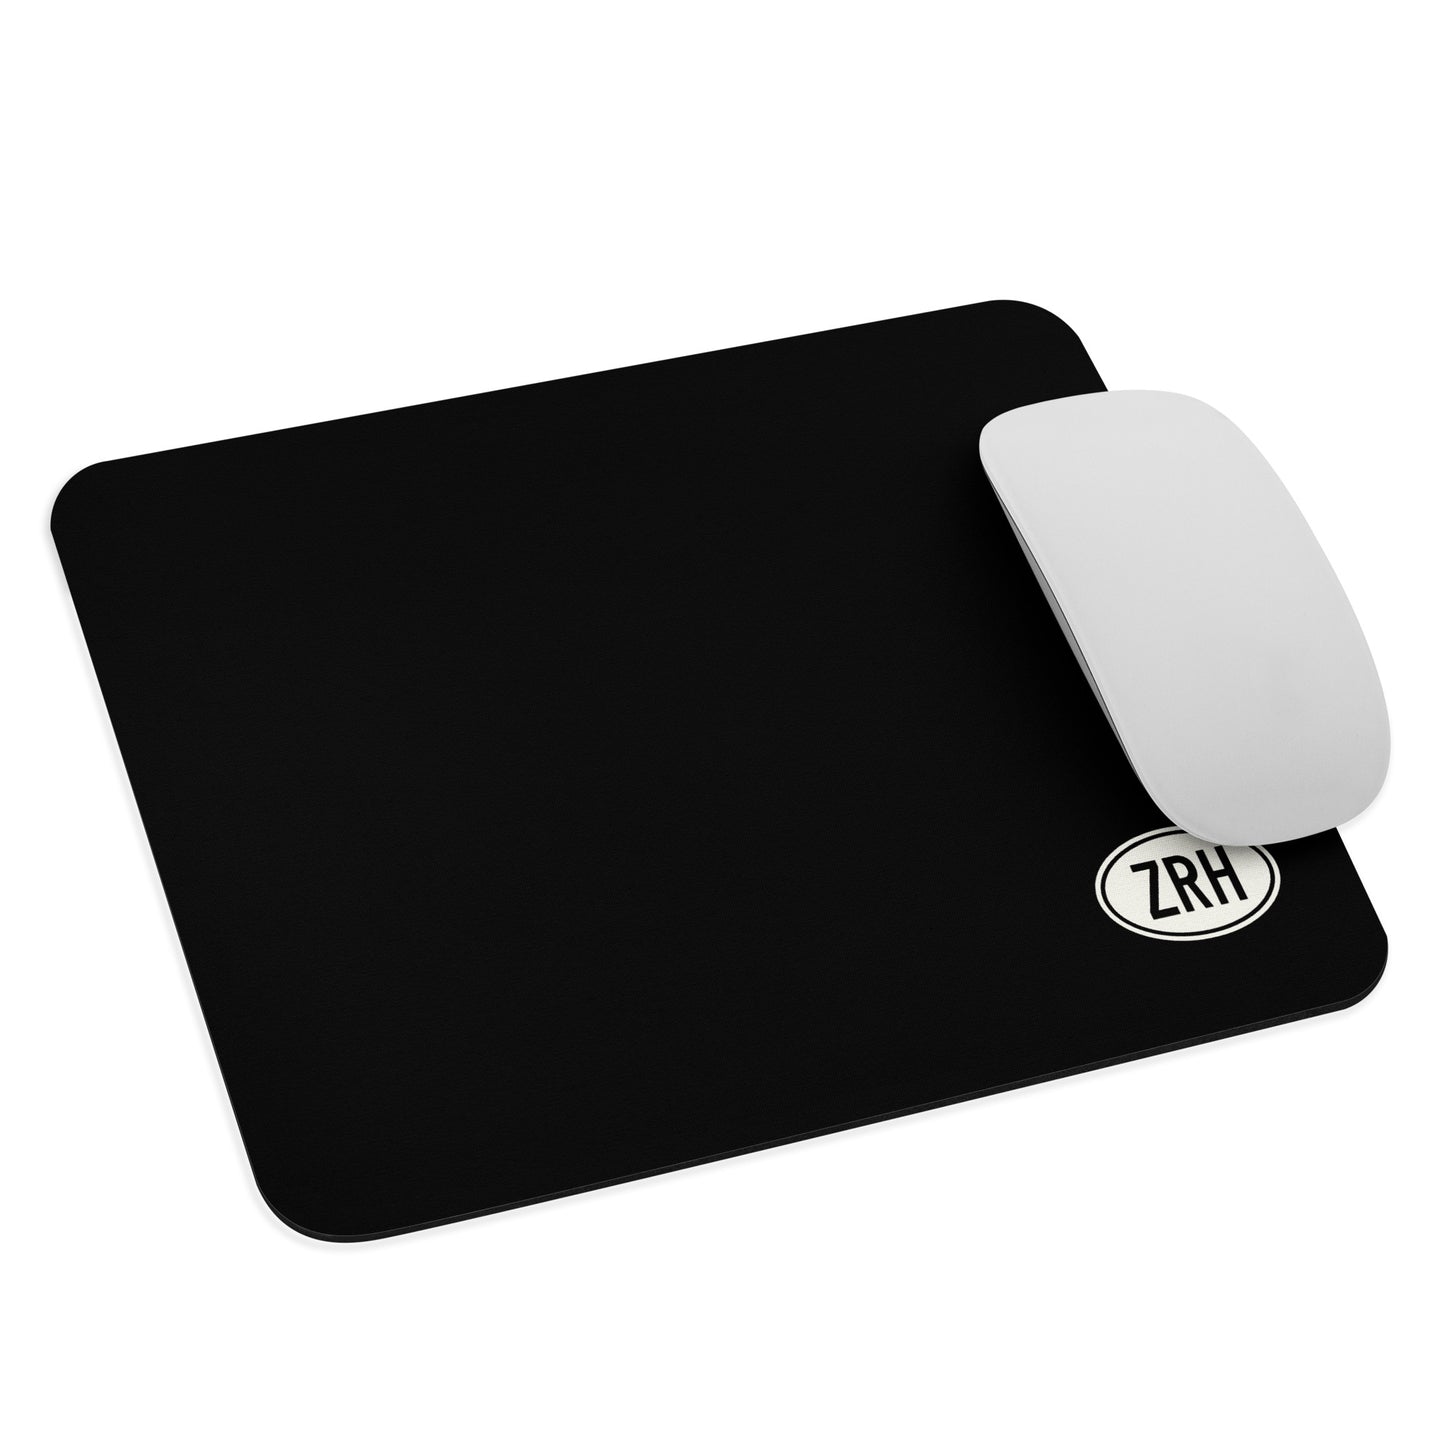 Unique Travel Gift Mouse Pad - White Oval • ZRH Zurich • YHM Designs - Image 03